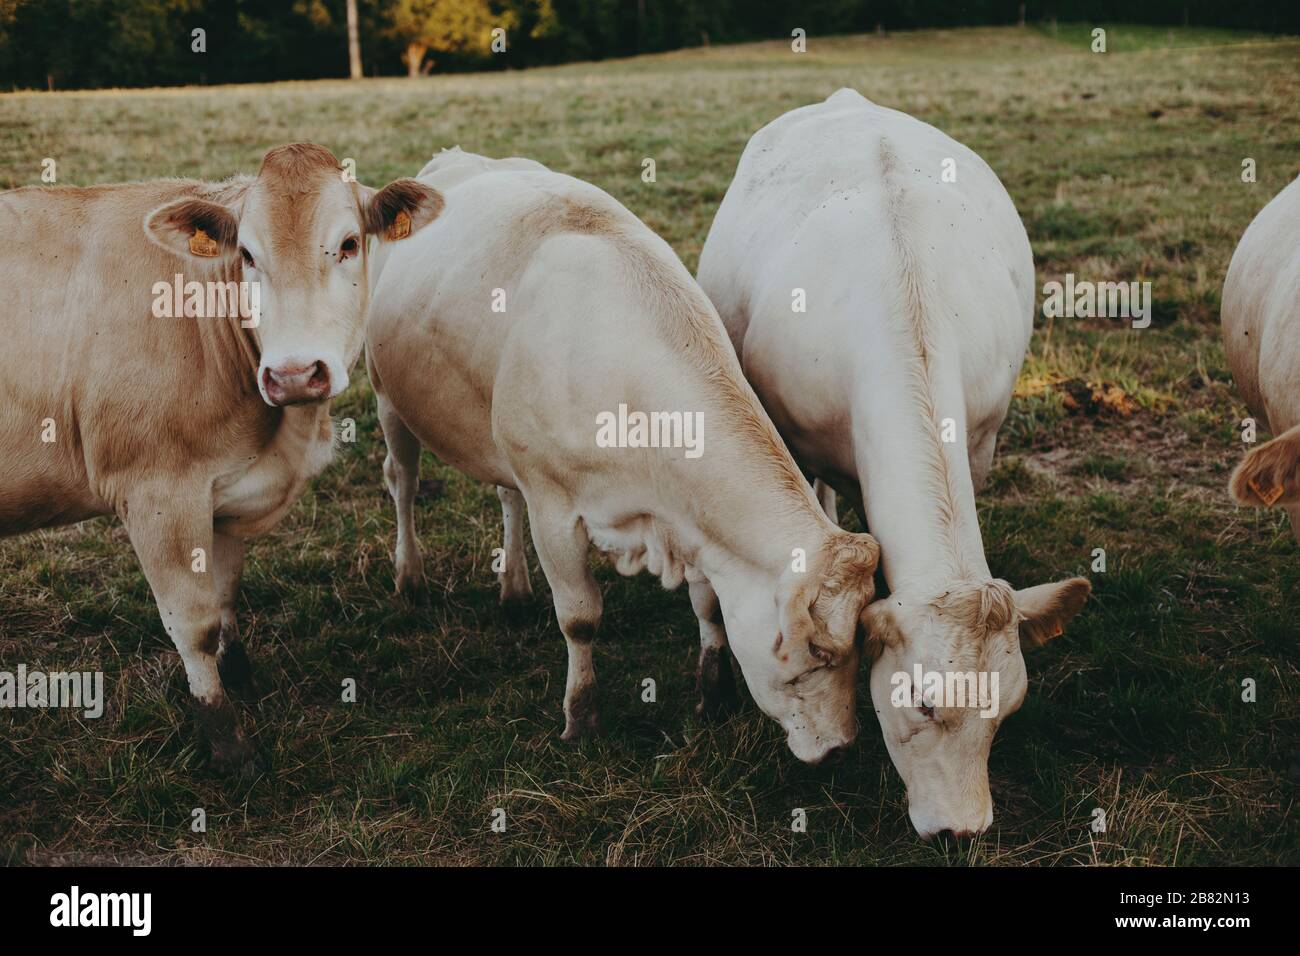 A local family farm raises cows for meat in the Champagne Region, France, Cows are grass-fed on surrounding pastures during warm months. Stock Photo